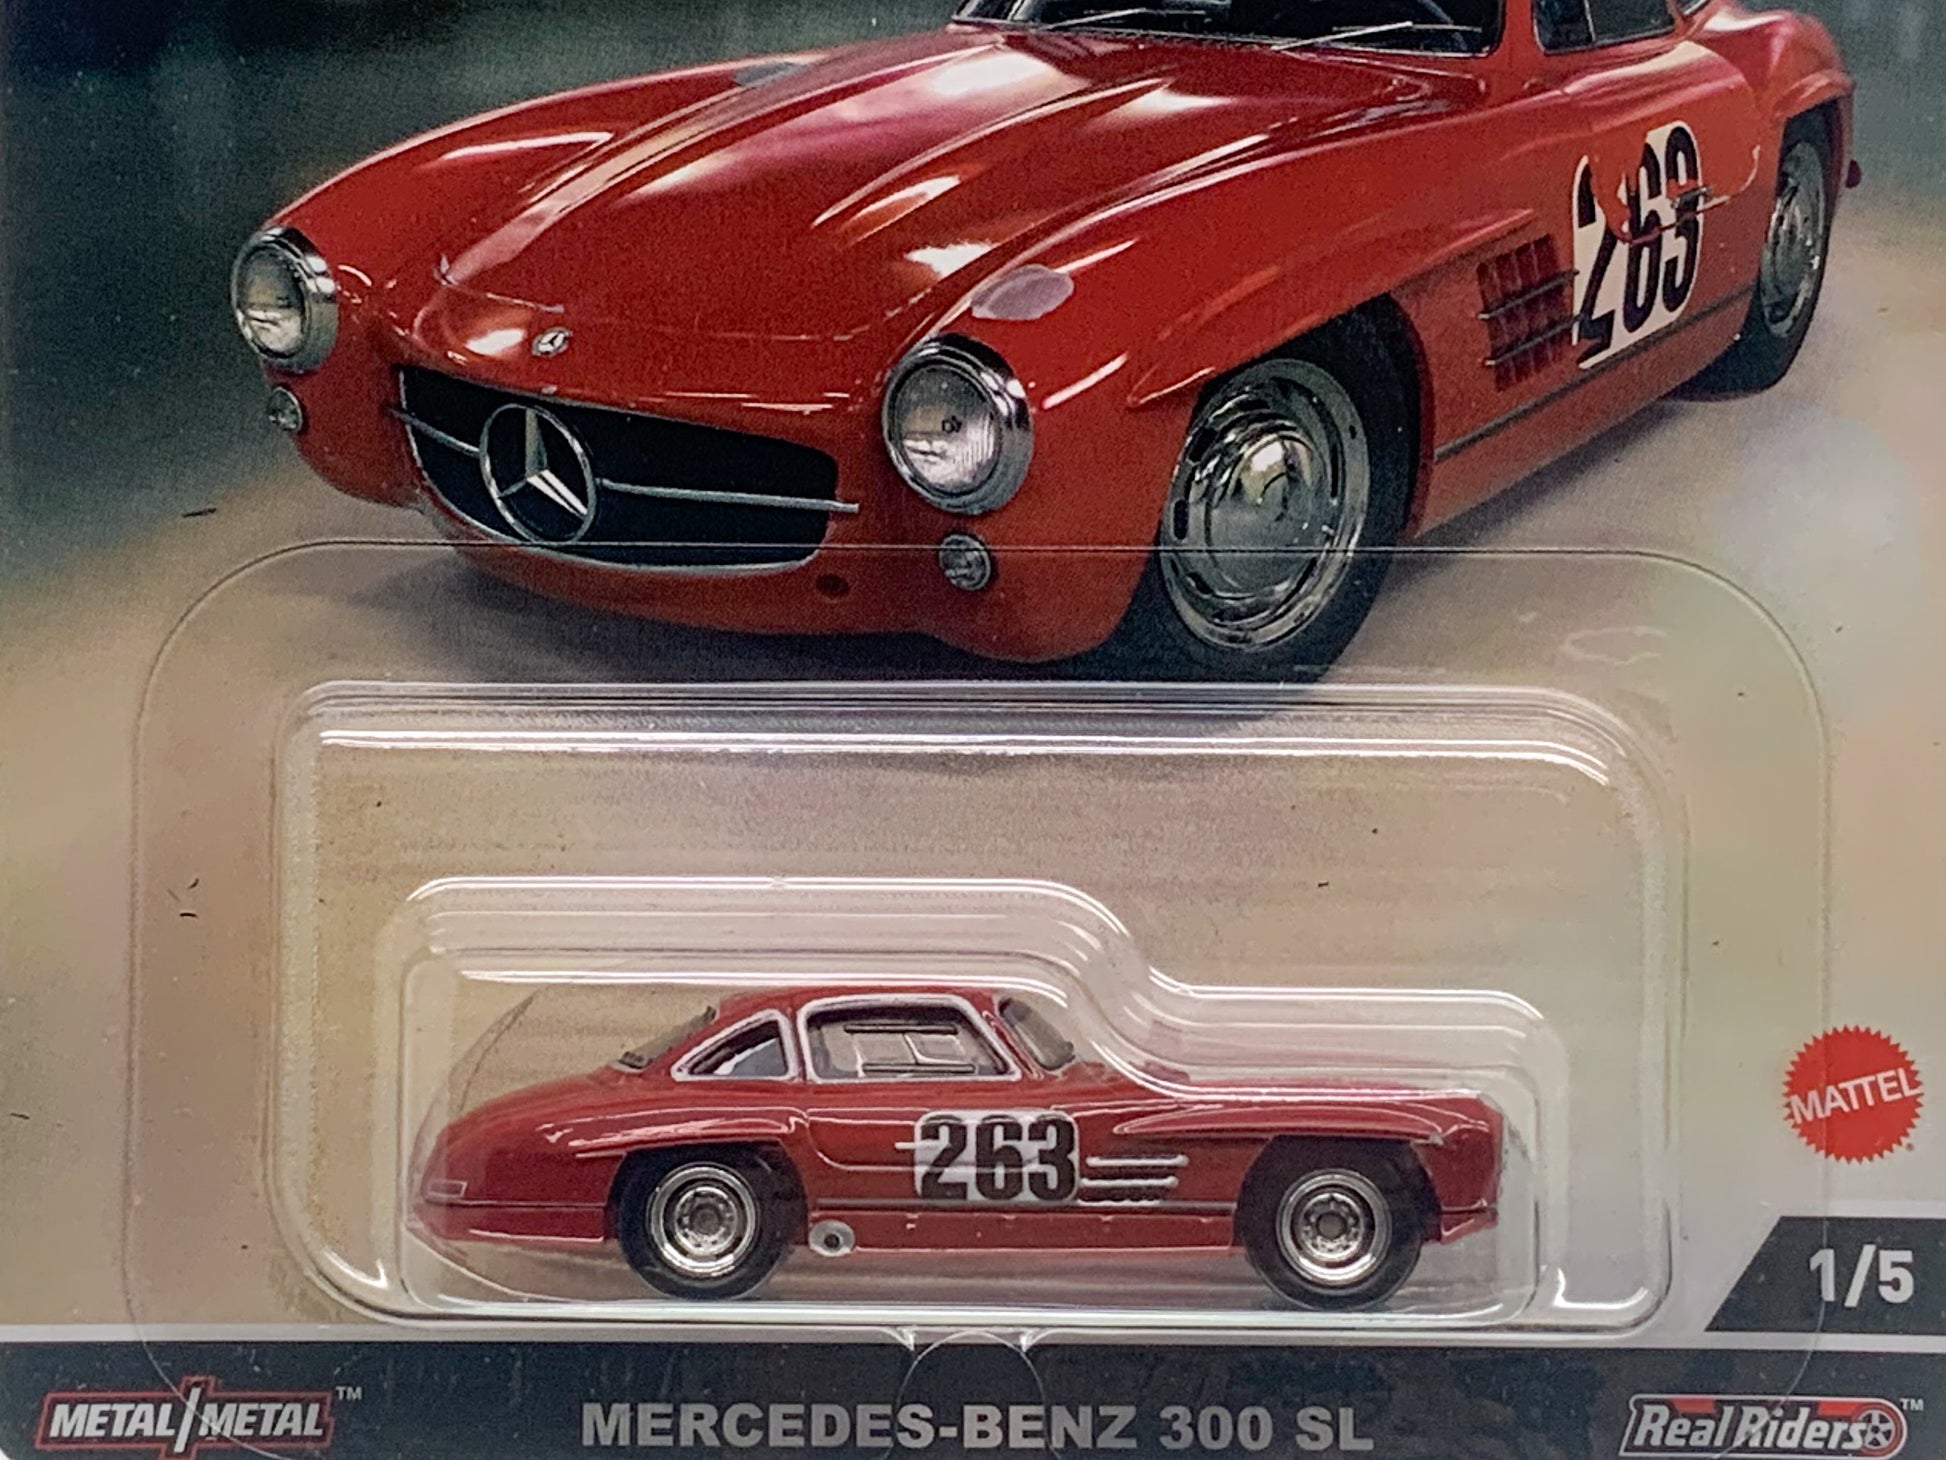 Buy at Tatoyshop.com Hot Wheels Car Culture Mercedes-Benz 300 SL 1/5 Number 1 from the set of 5 Jay Leno’s Garage Series Premium Real Riders Metal Mattel FPY86 Shop Now Mr Toys Kmart Target Big W